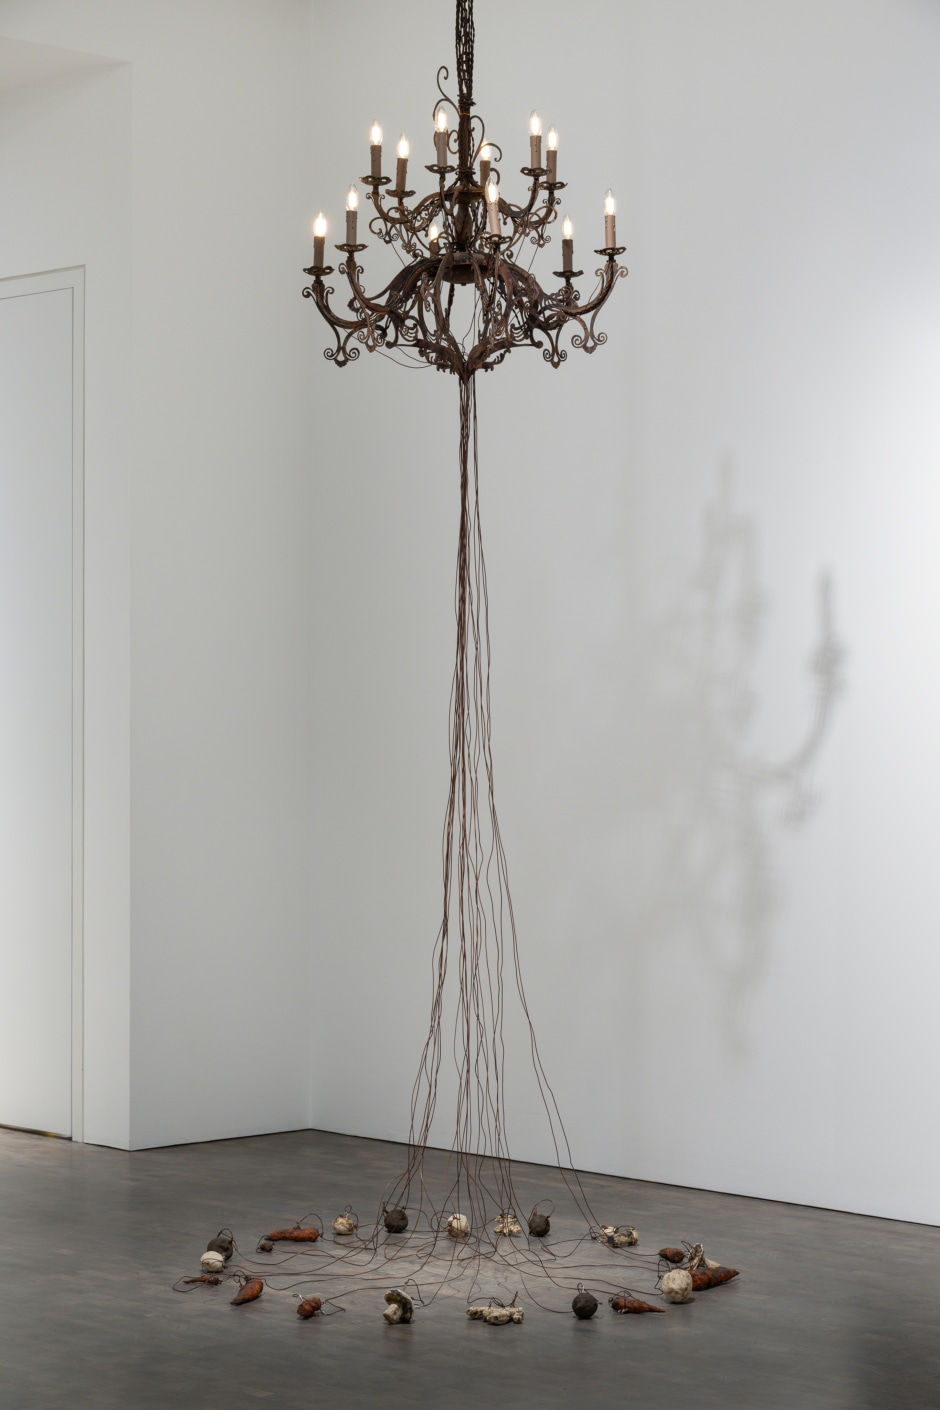 Paulina Olowska and Jessica Segall  Electrical Vegetables Chandelier , 2023  metal chandelier and vegetable ceramics  installation dimensions 532 x 120 x 120 / 209 ½ x 47 ¼ x 47 ¼ in.  © Paulina Olowska and Jessica Segall. Courtesy Pace Gallery.